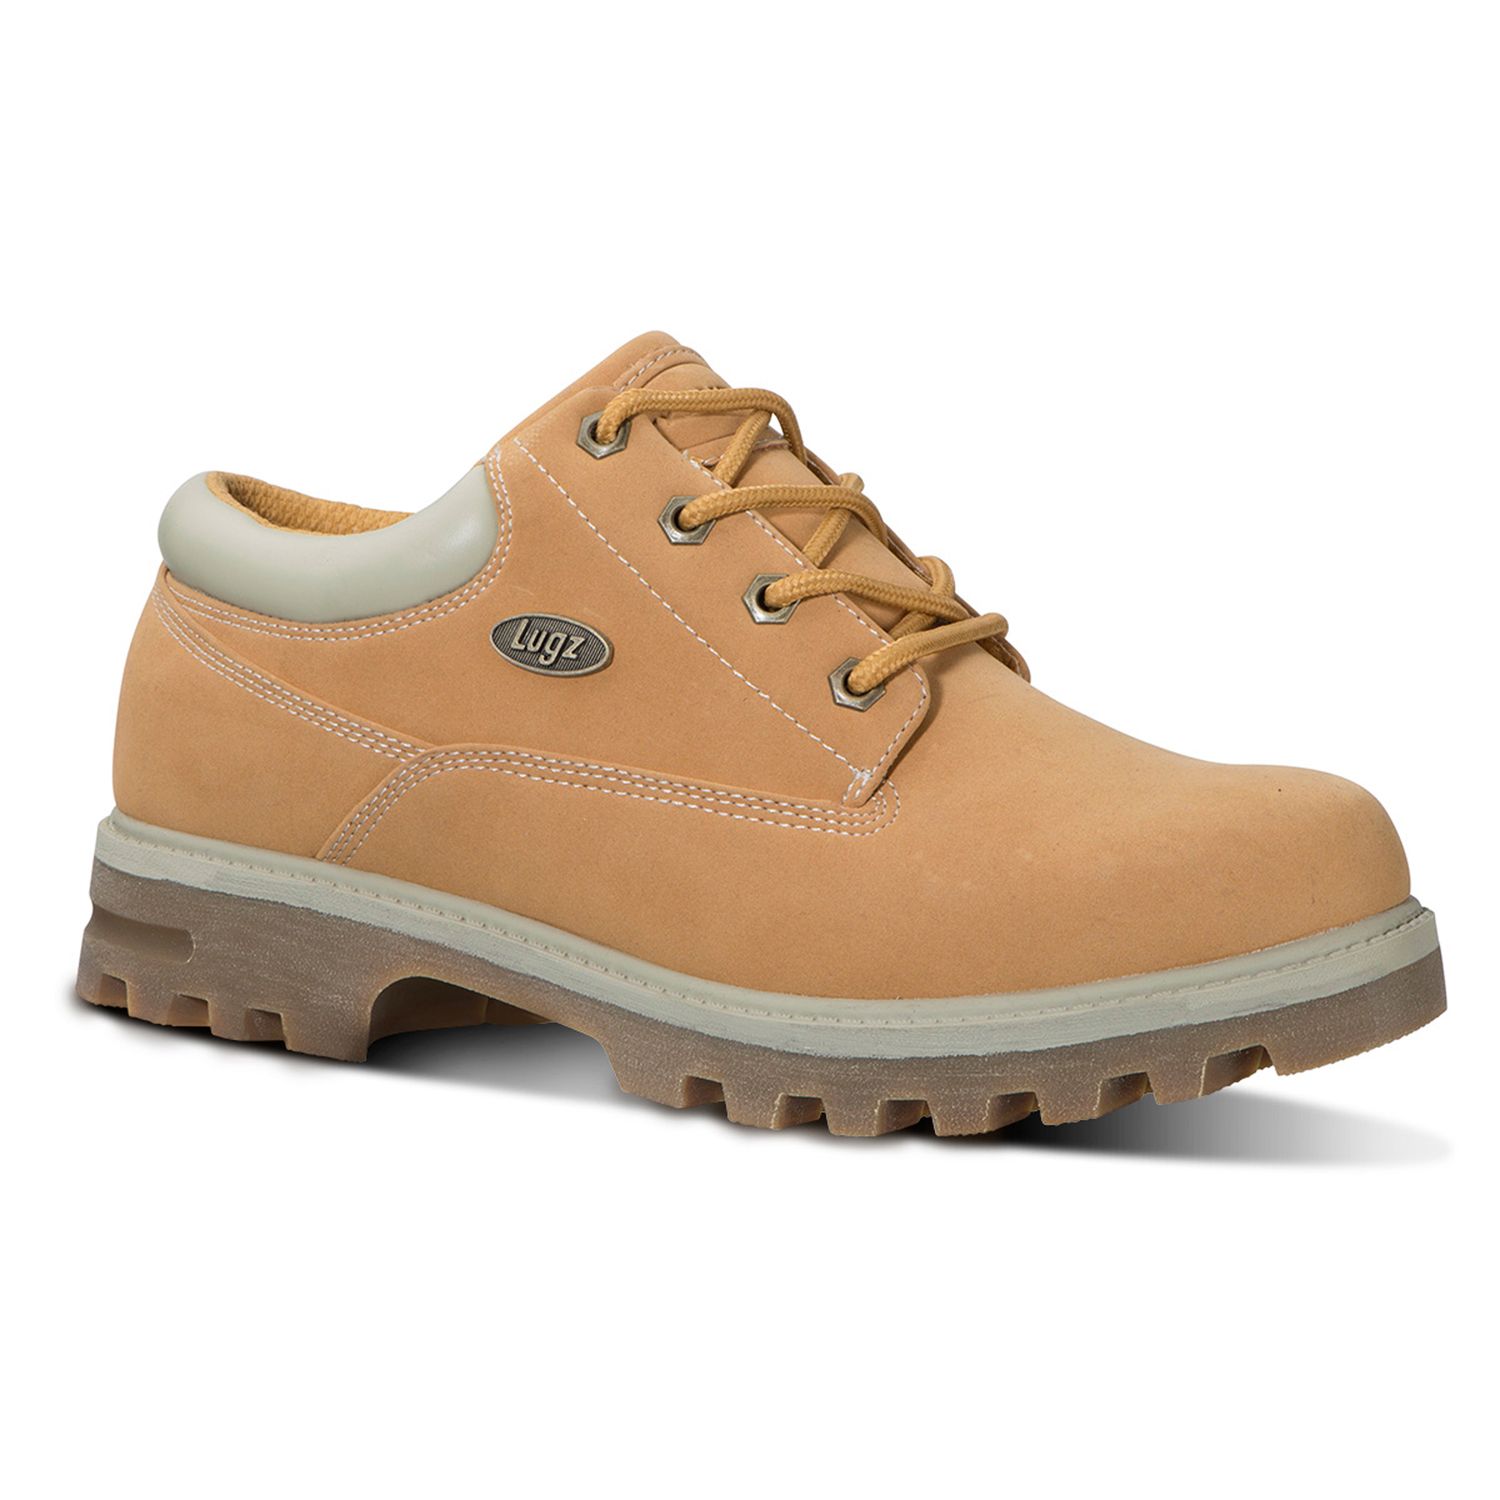 lugz ankle boots